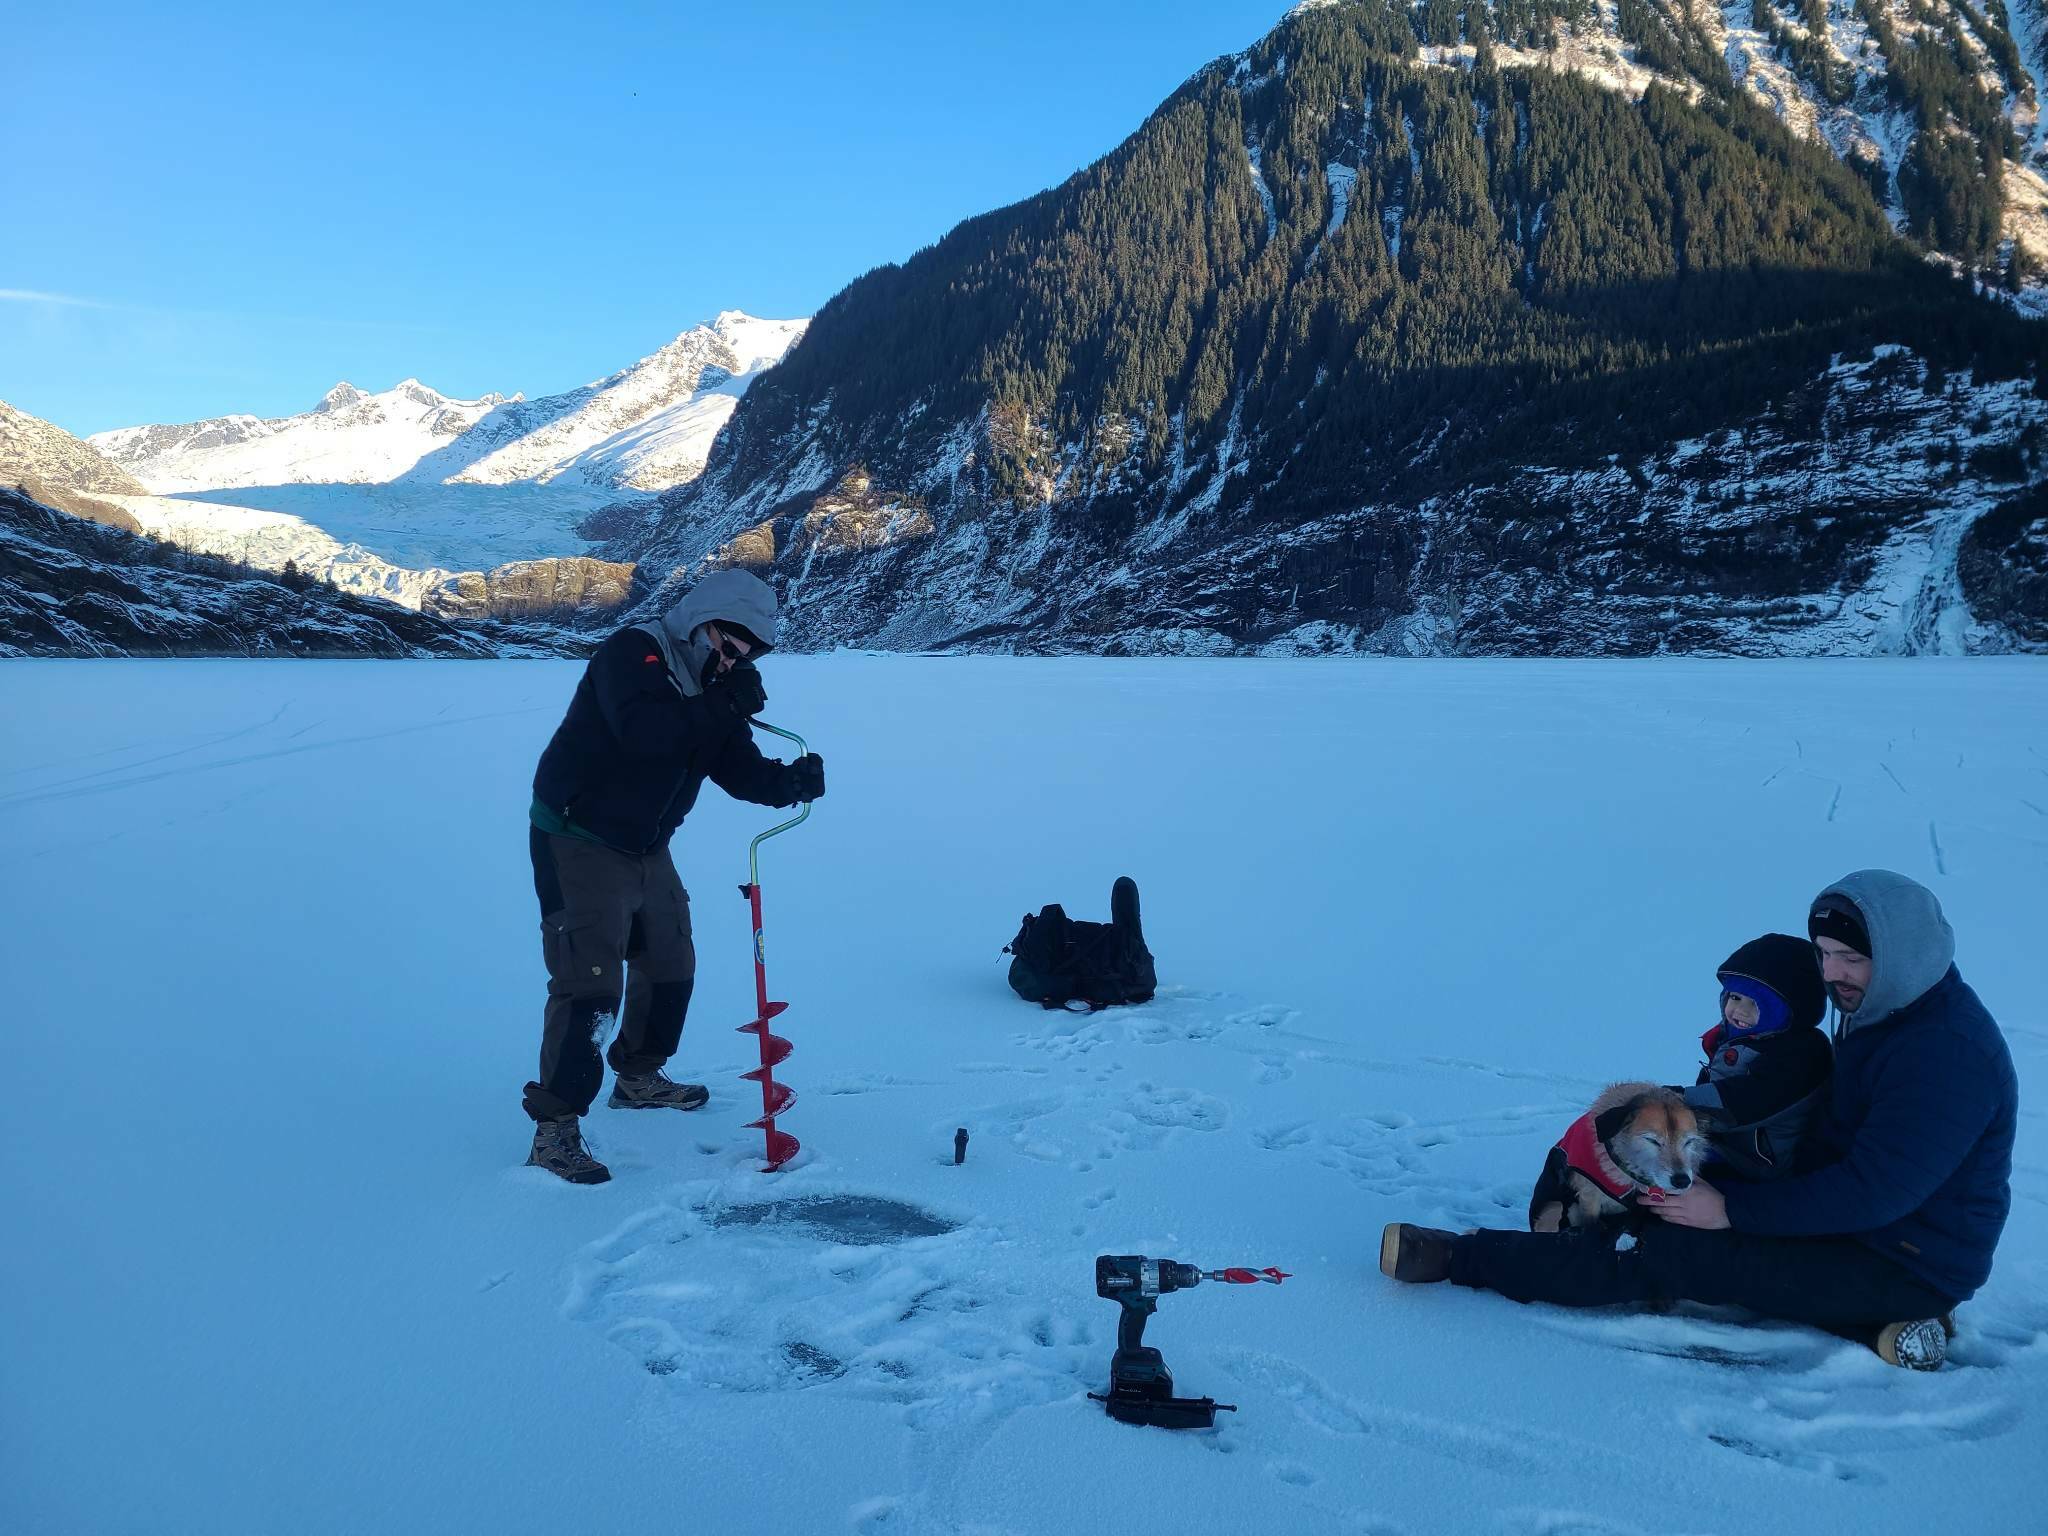 Brian Weed drills a hole on Mendenhall lake Monday morning. Weed said each winter he drills the lake around 3-4 times and has done so as a form of public service for around five years. This time around he said the average thickness was around six inches. (Courtesy / Brian Weed)